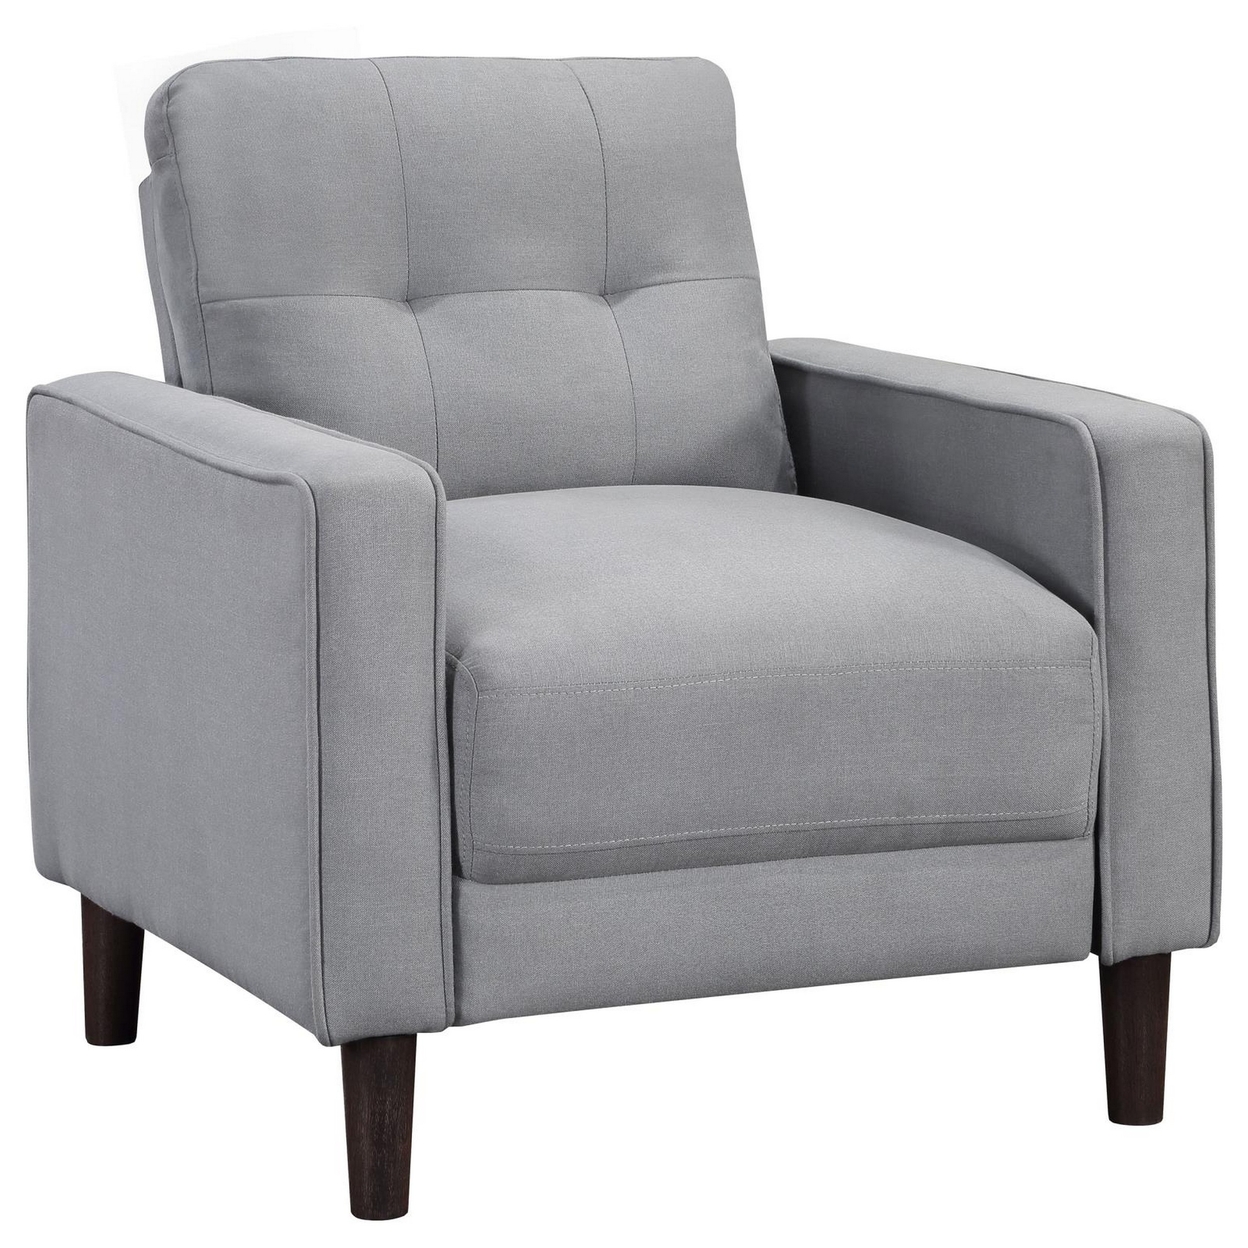 Bow 32 Inch Accent Chair, Grid Tufted, Track Arms, Self Welt Trim, Gray -Saltoro Sherpi